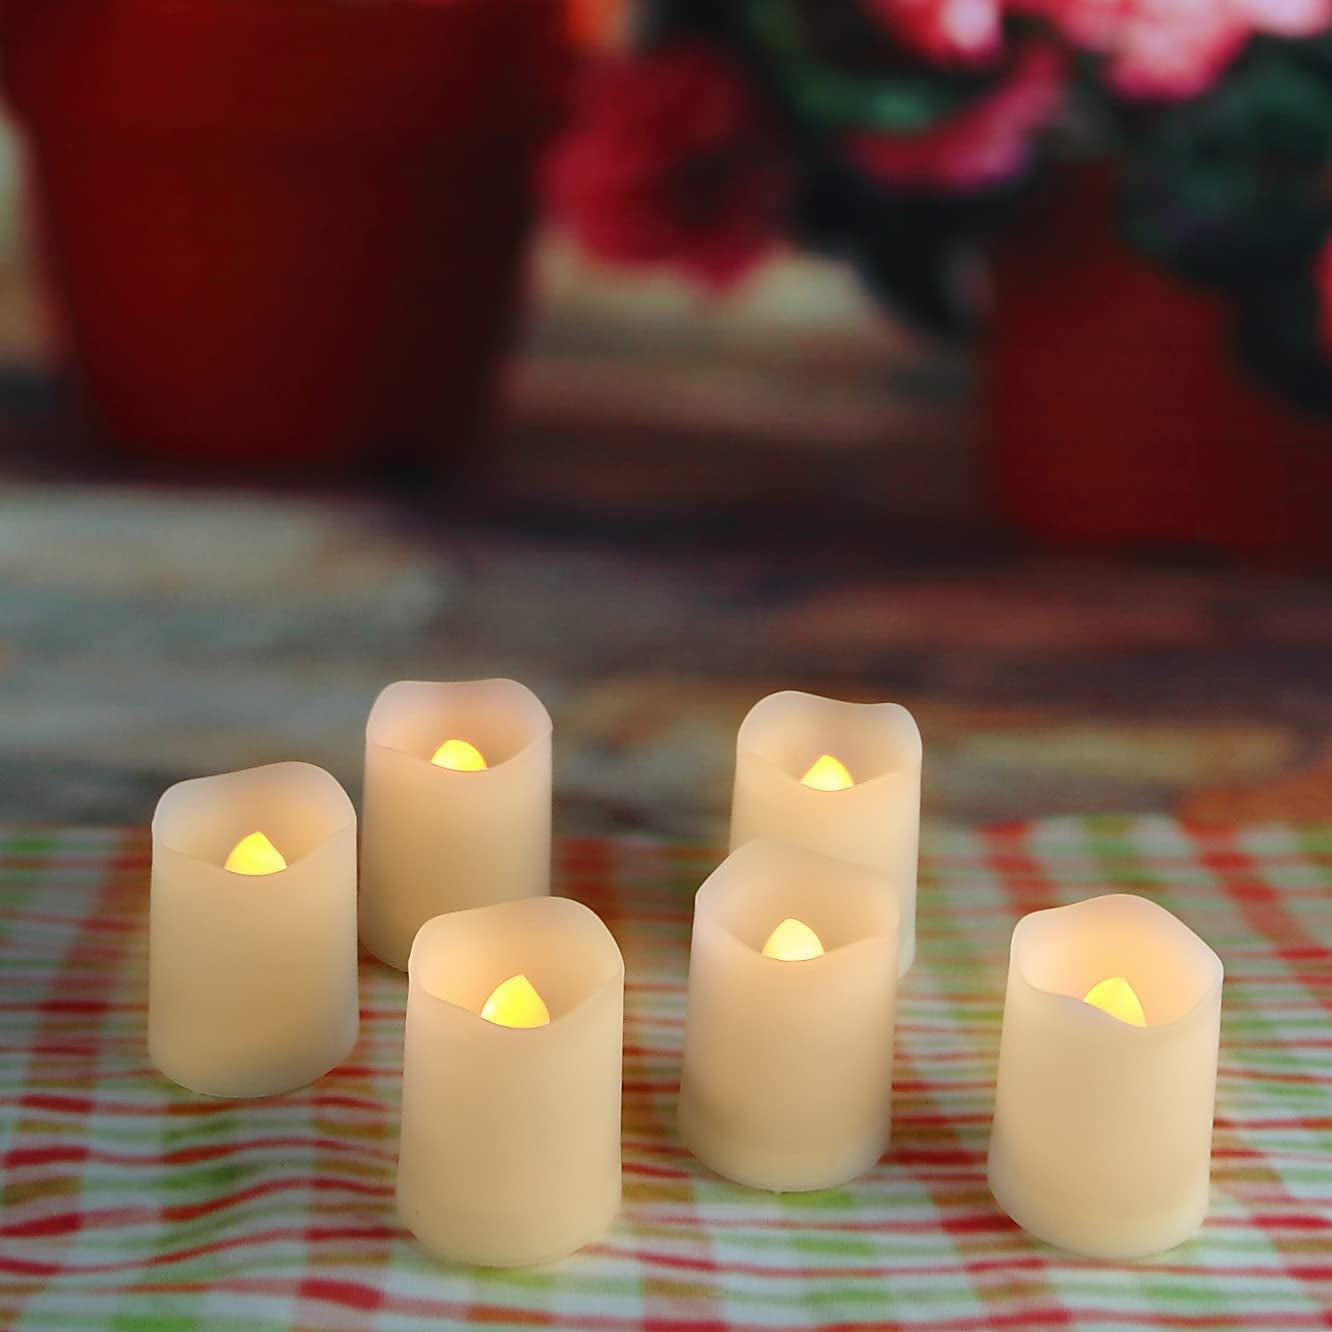 Battery Operated Flameless Votive Candles with Remote and Timer Realistic Flickering Electric Tea Lights Halloween Christmas Wedding Party Decorations Centerpieces 6 PCS Batteries Incl.